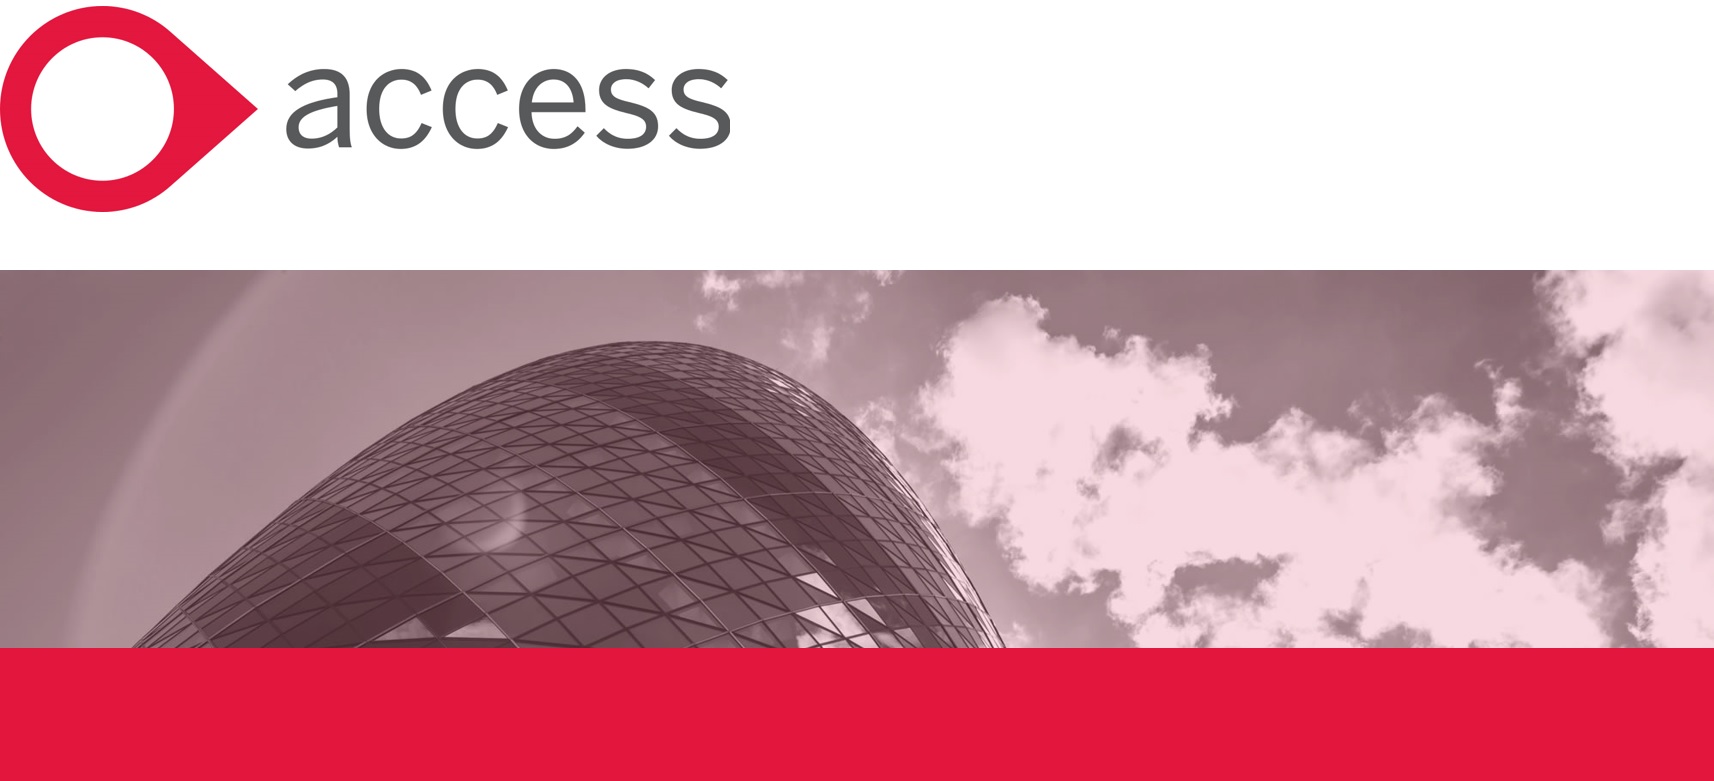 Access Banner for App page